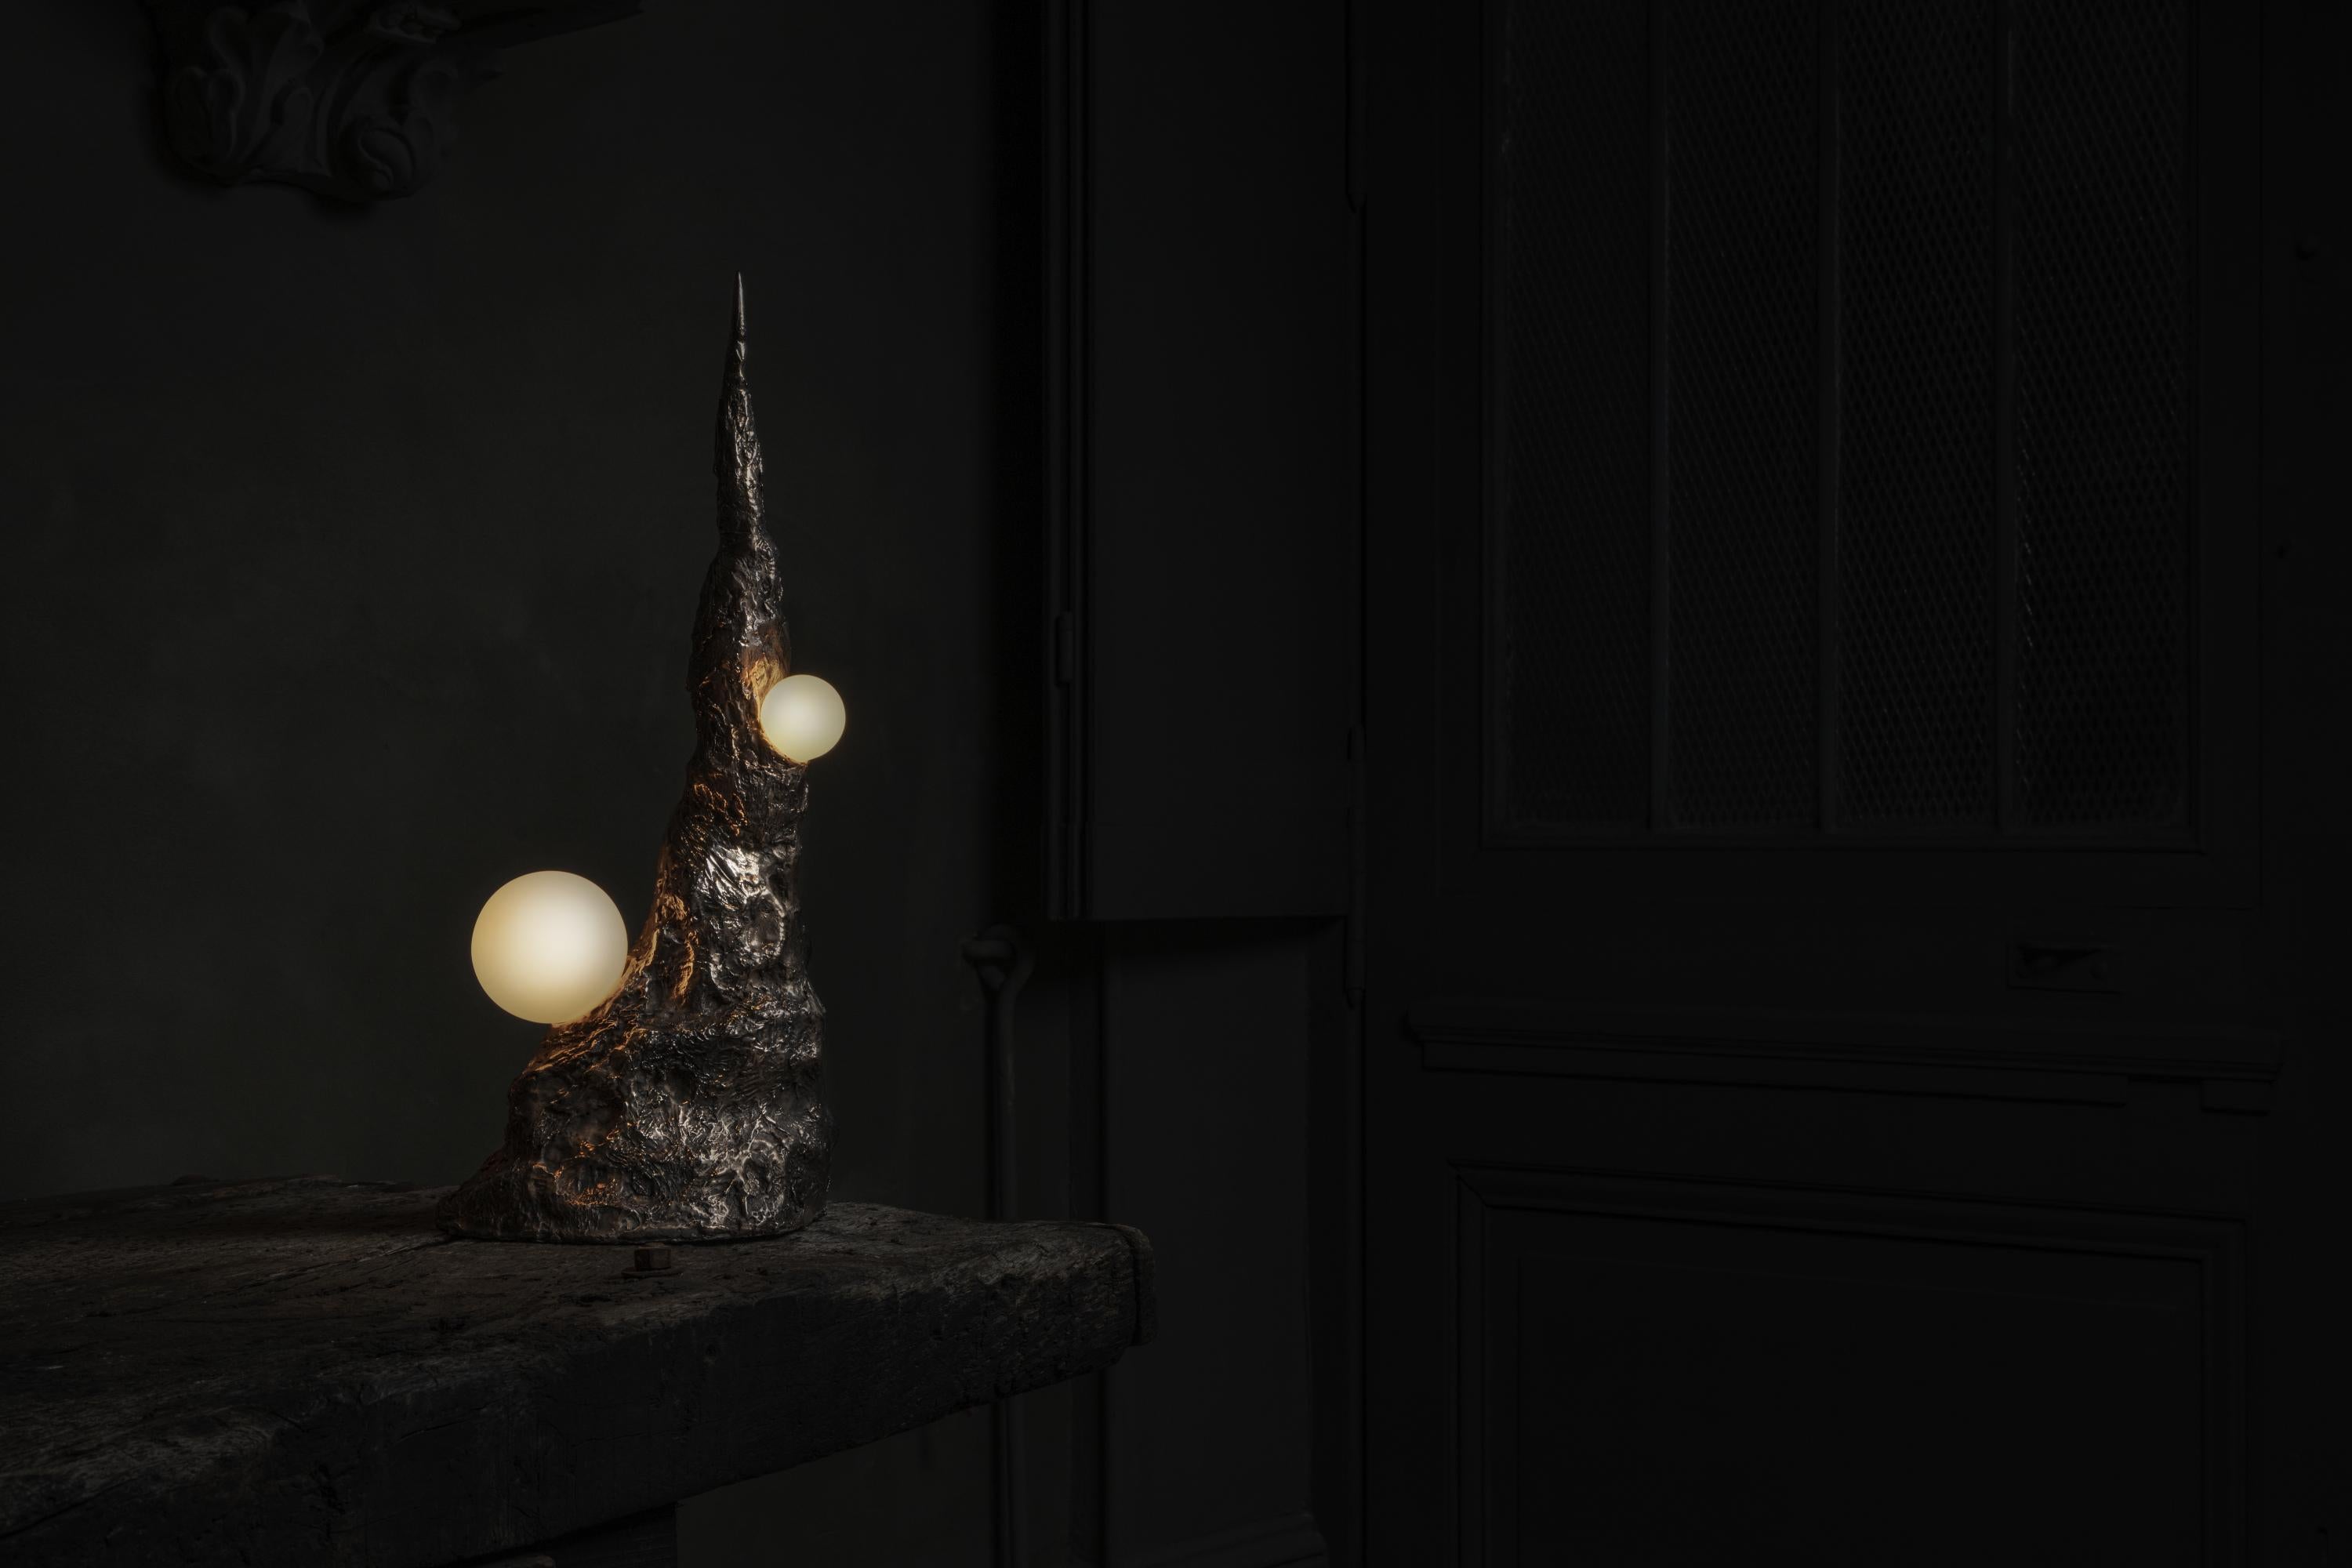 Khaos - bronze sculptural table lamp, signed by William Guillon
Khaos
Dimensions: 52 x 17 x 20 cm
Weight: 7 kg.
Bronze
Limited edition 1/12, signed and numbered
Bulb E27, 540 lumens

With Khaos, William decides to extend the researches of